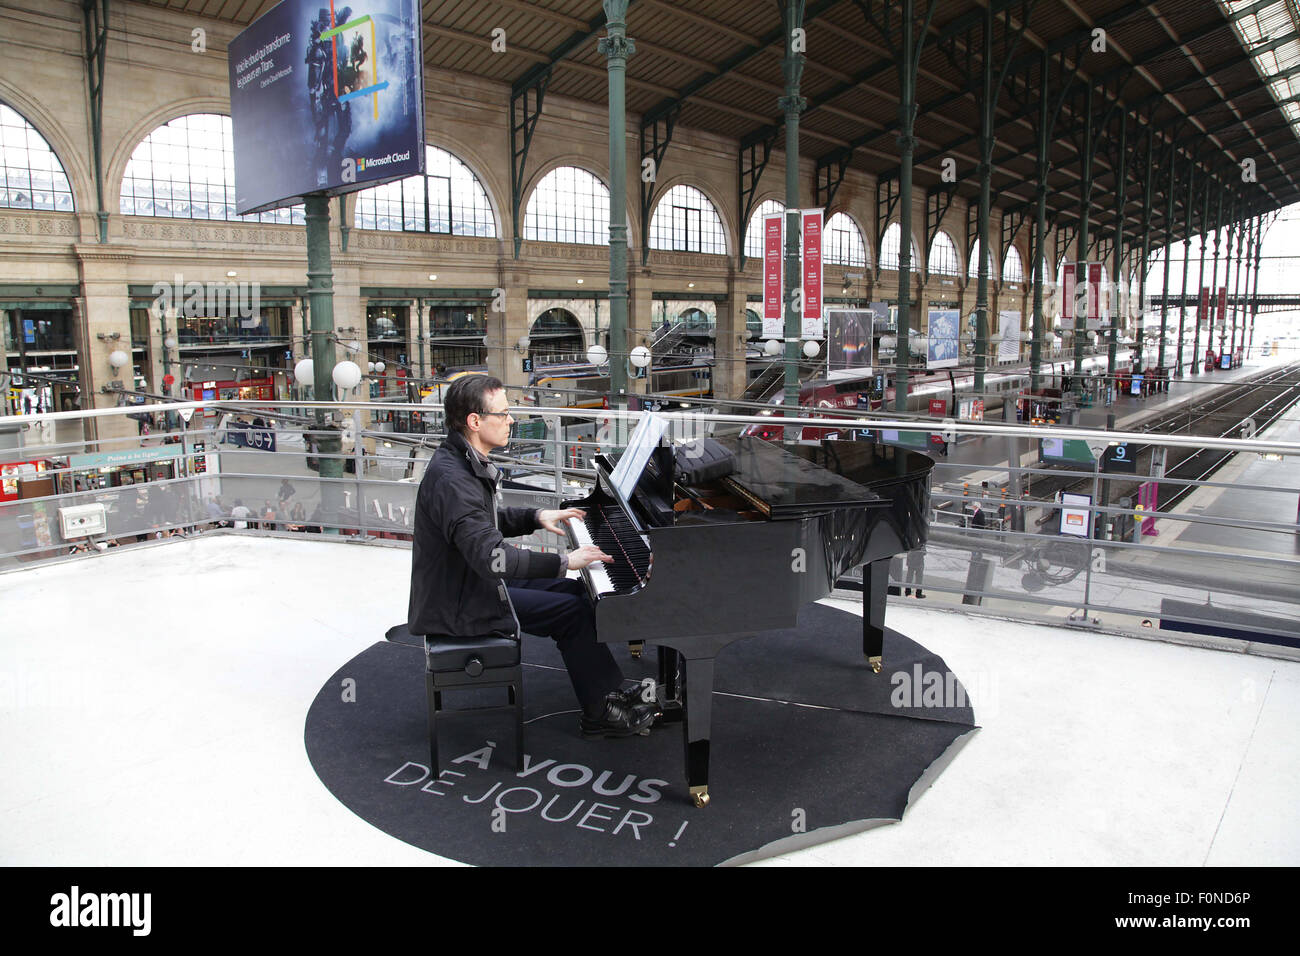 Piano player at Gare du Nord train station Paris France Stock Photo - Alamy